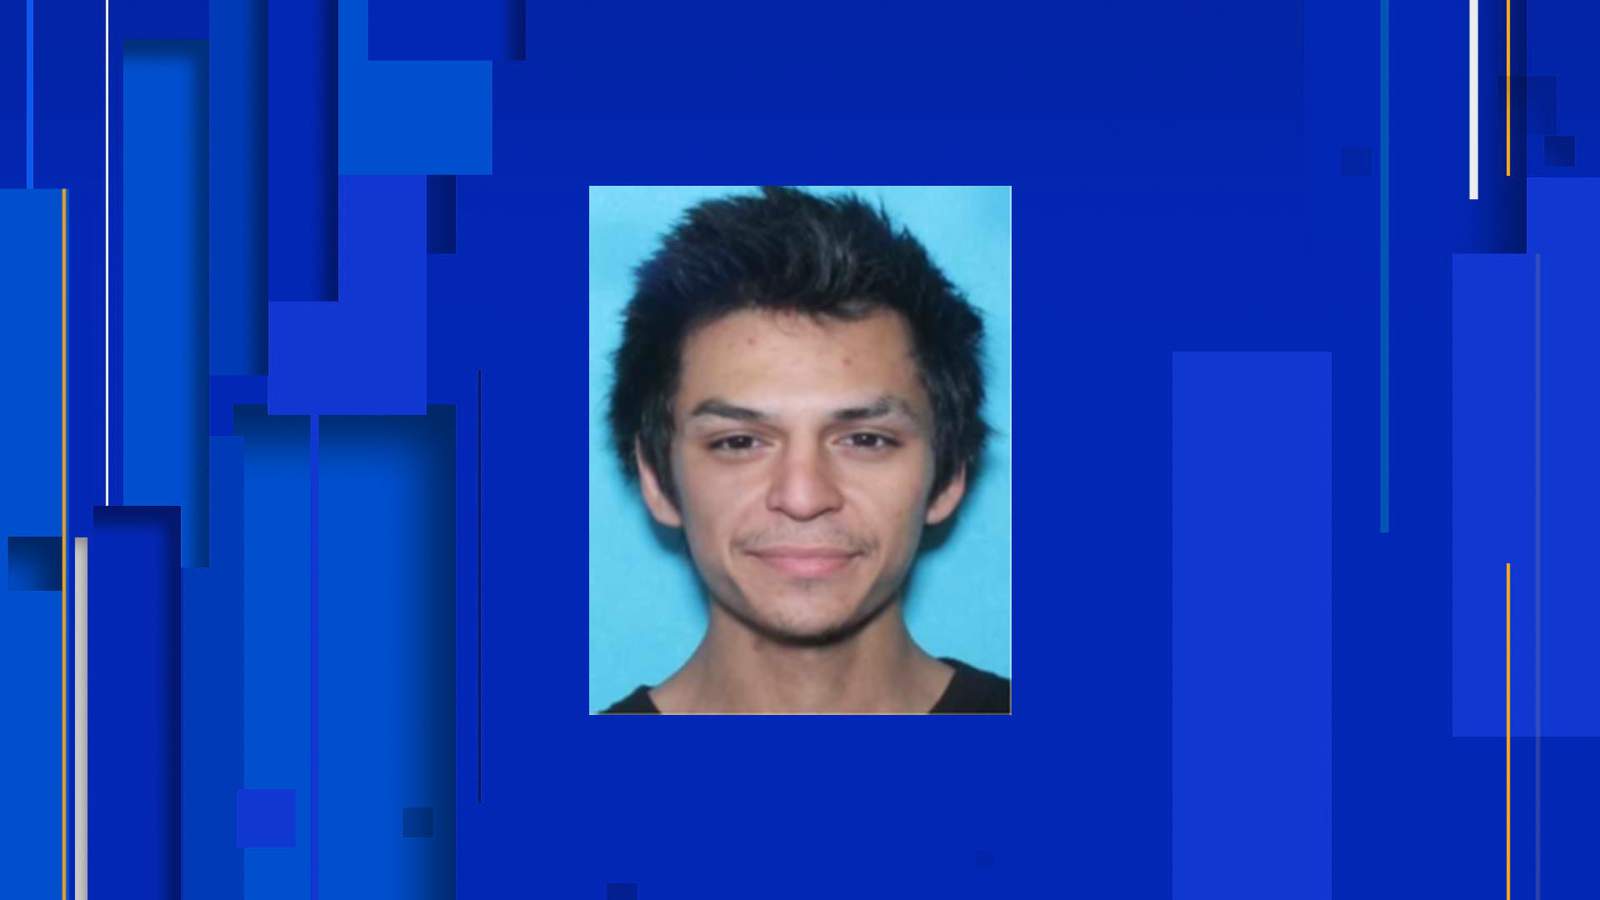 San Antonio police searching for missing 22-year-old man with diagnosed medical condition